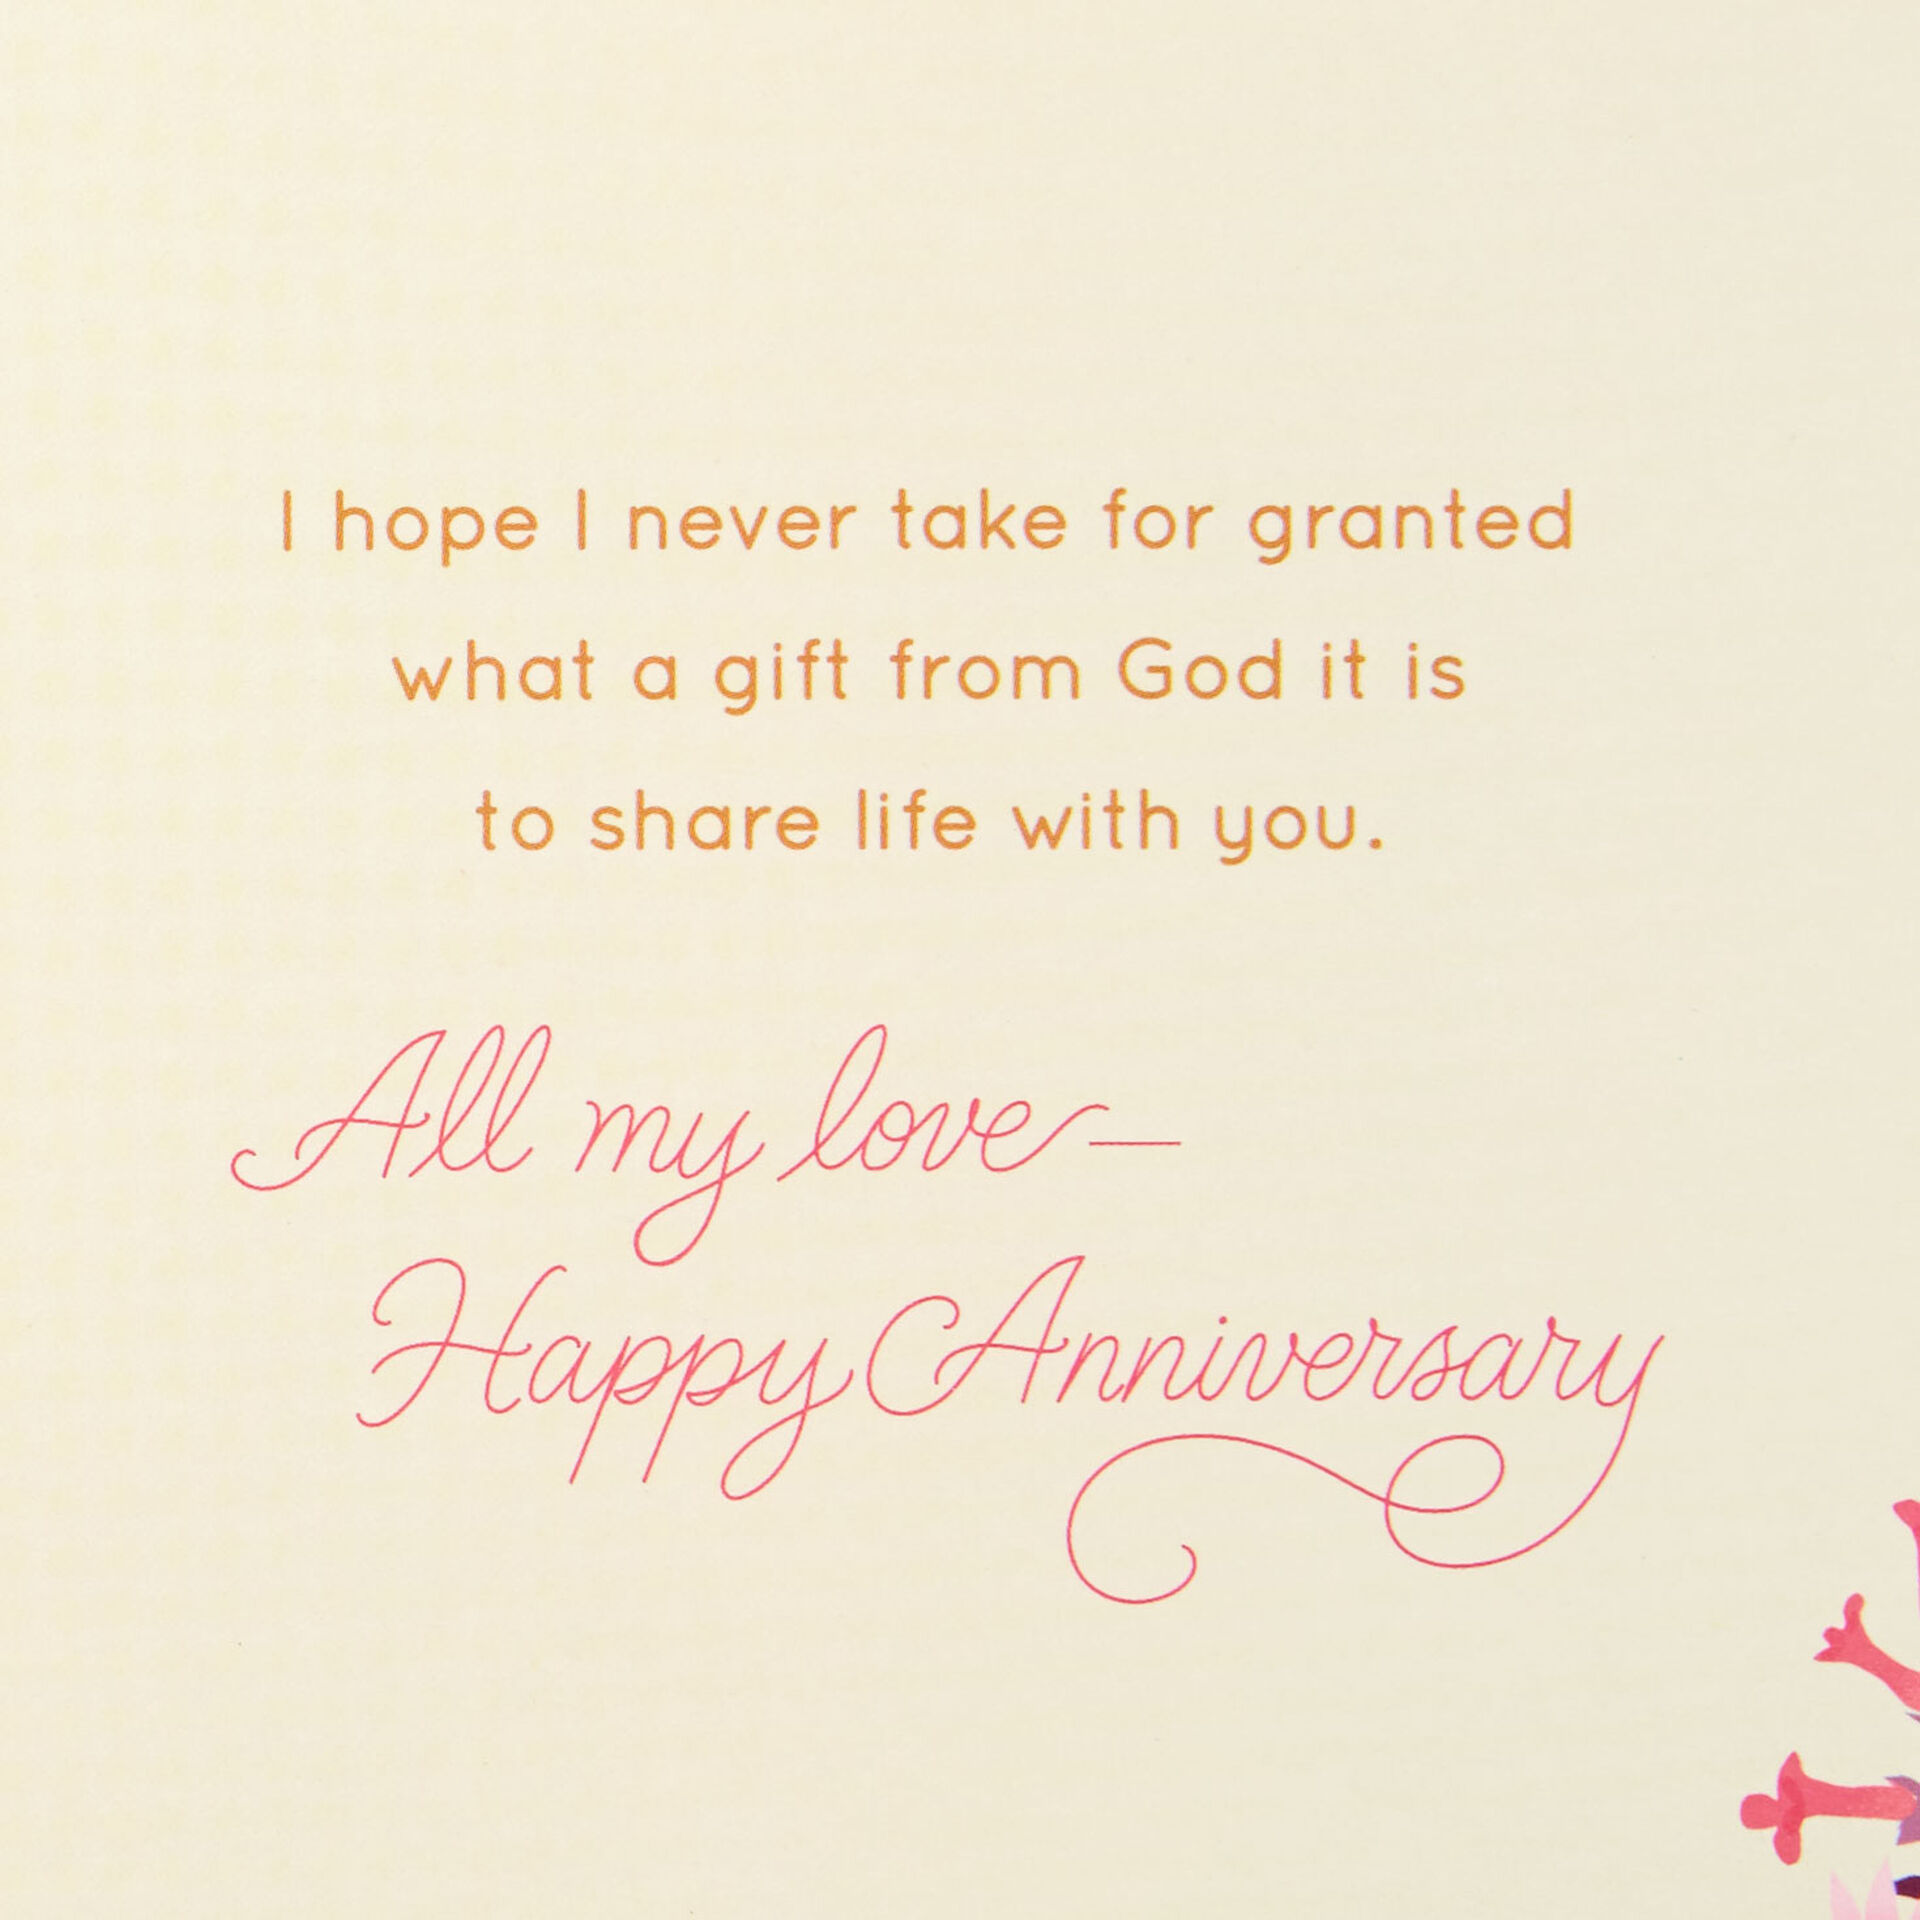 Sharing Life With You Religious Anniversary Card for Wife - Greeting ...